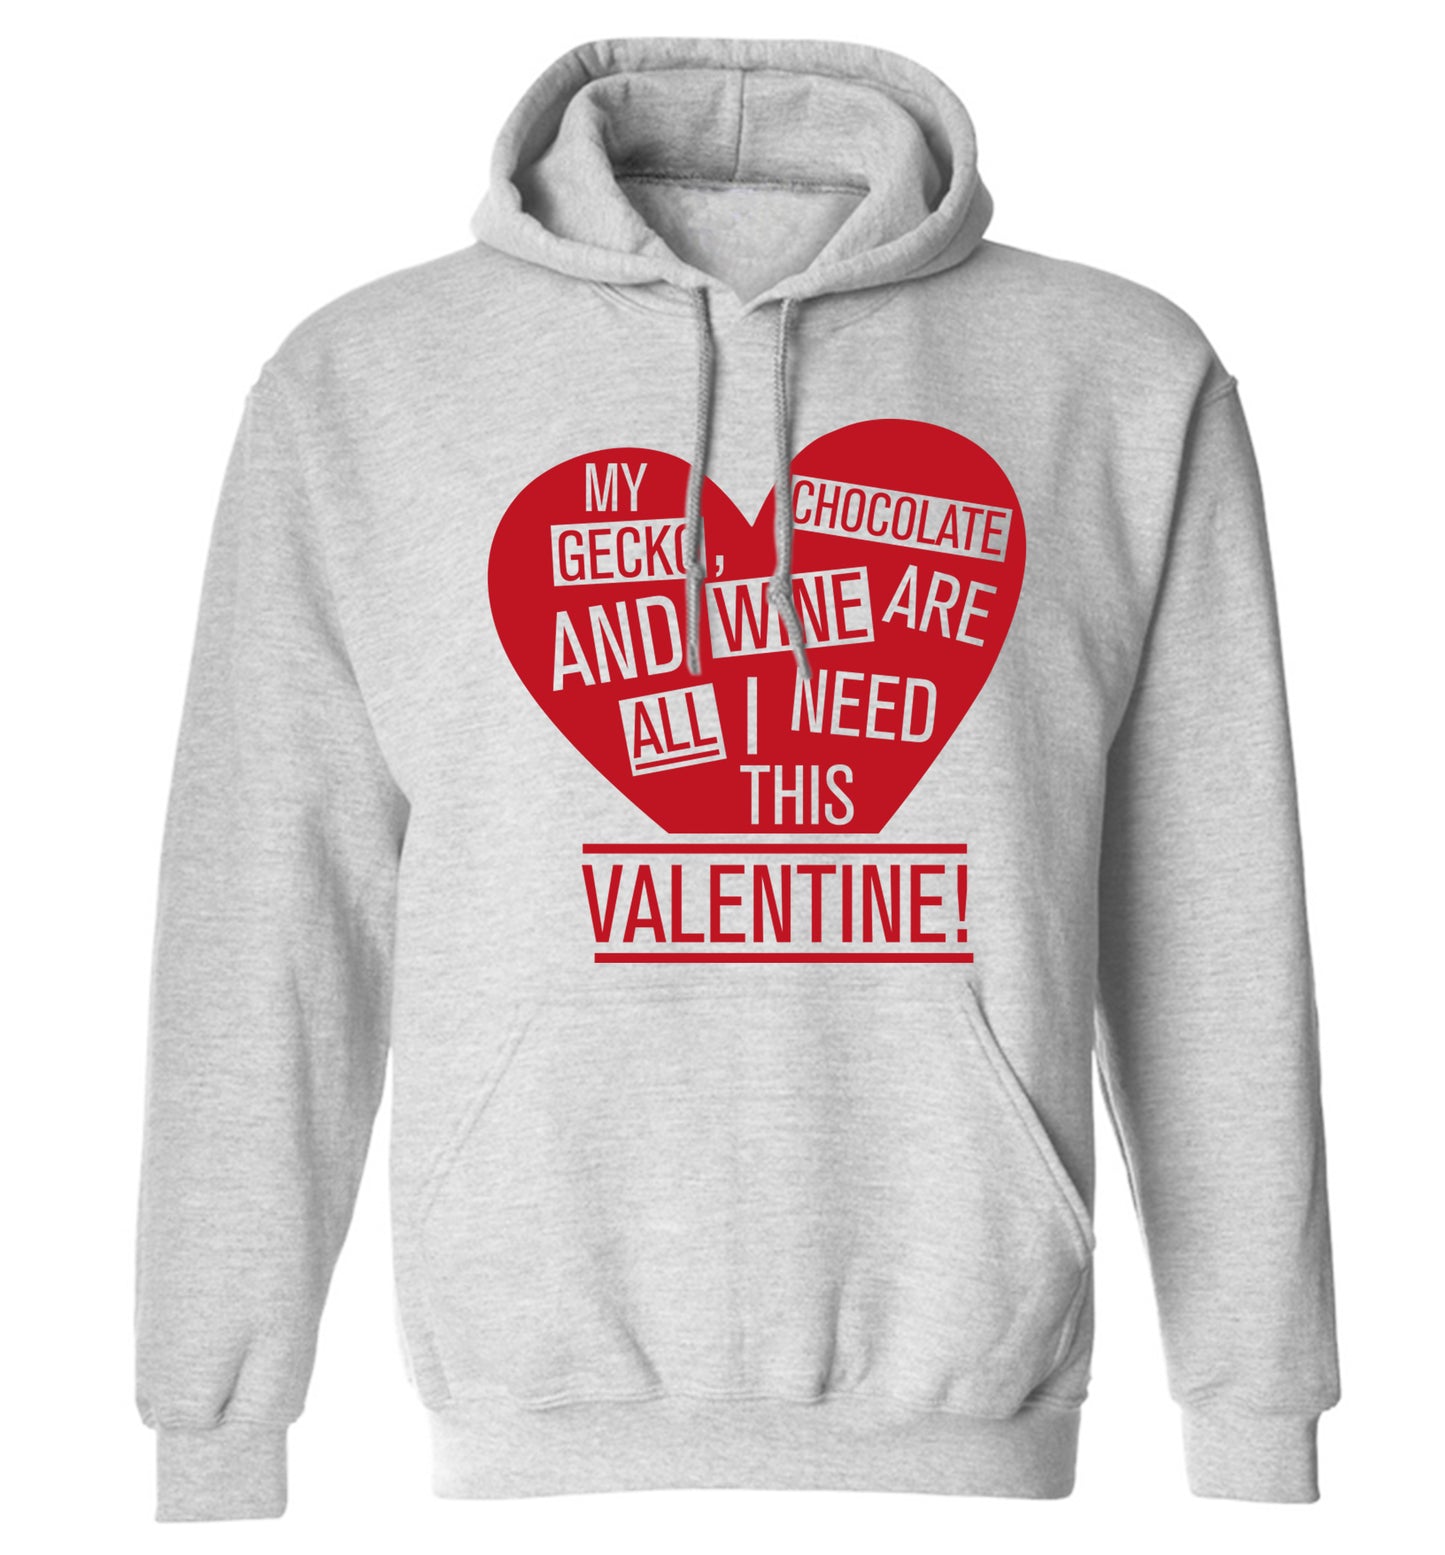 My gecko, chocolate and wine are all I need this valentine! adults unisex grey hoodie 2XL